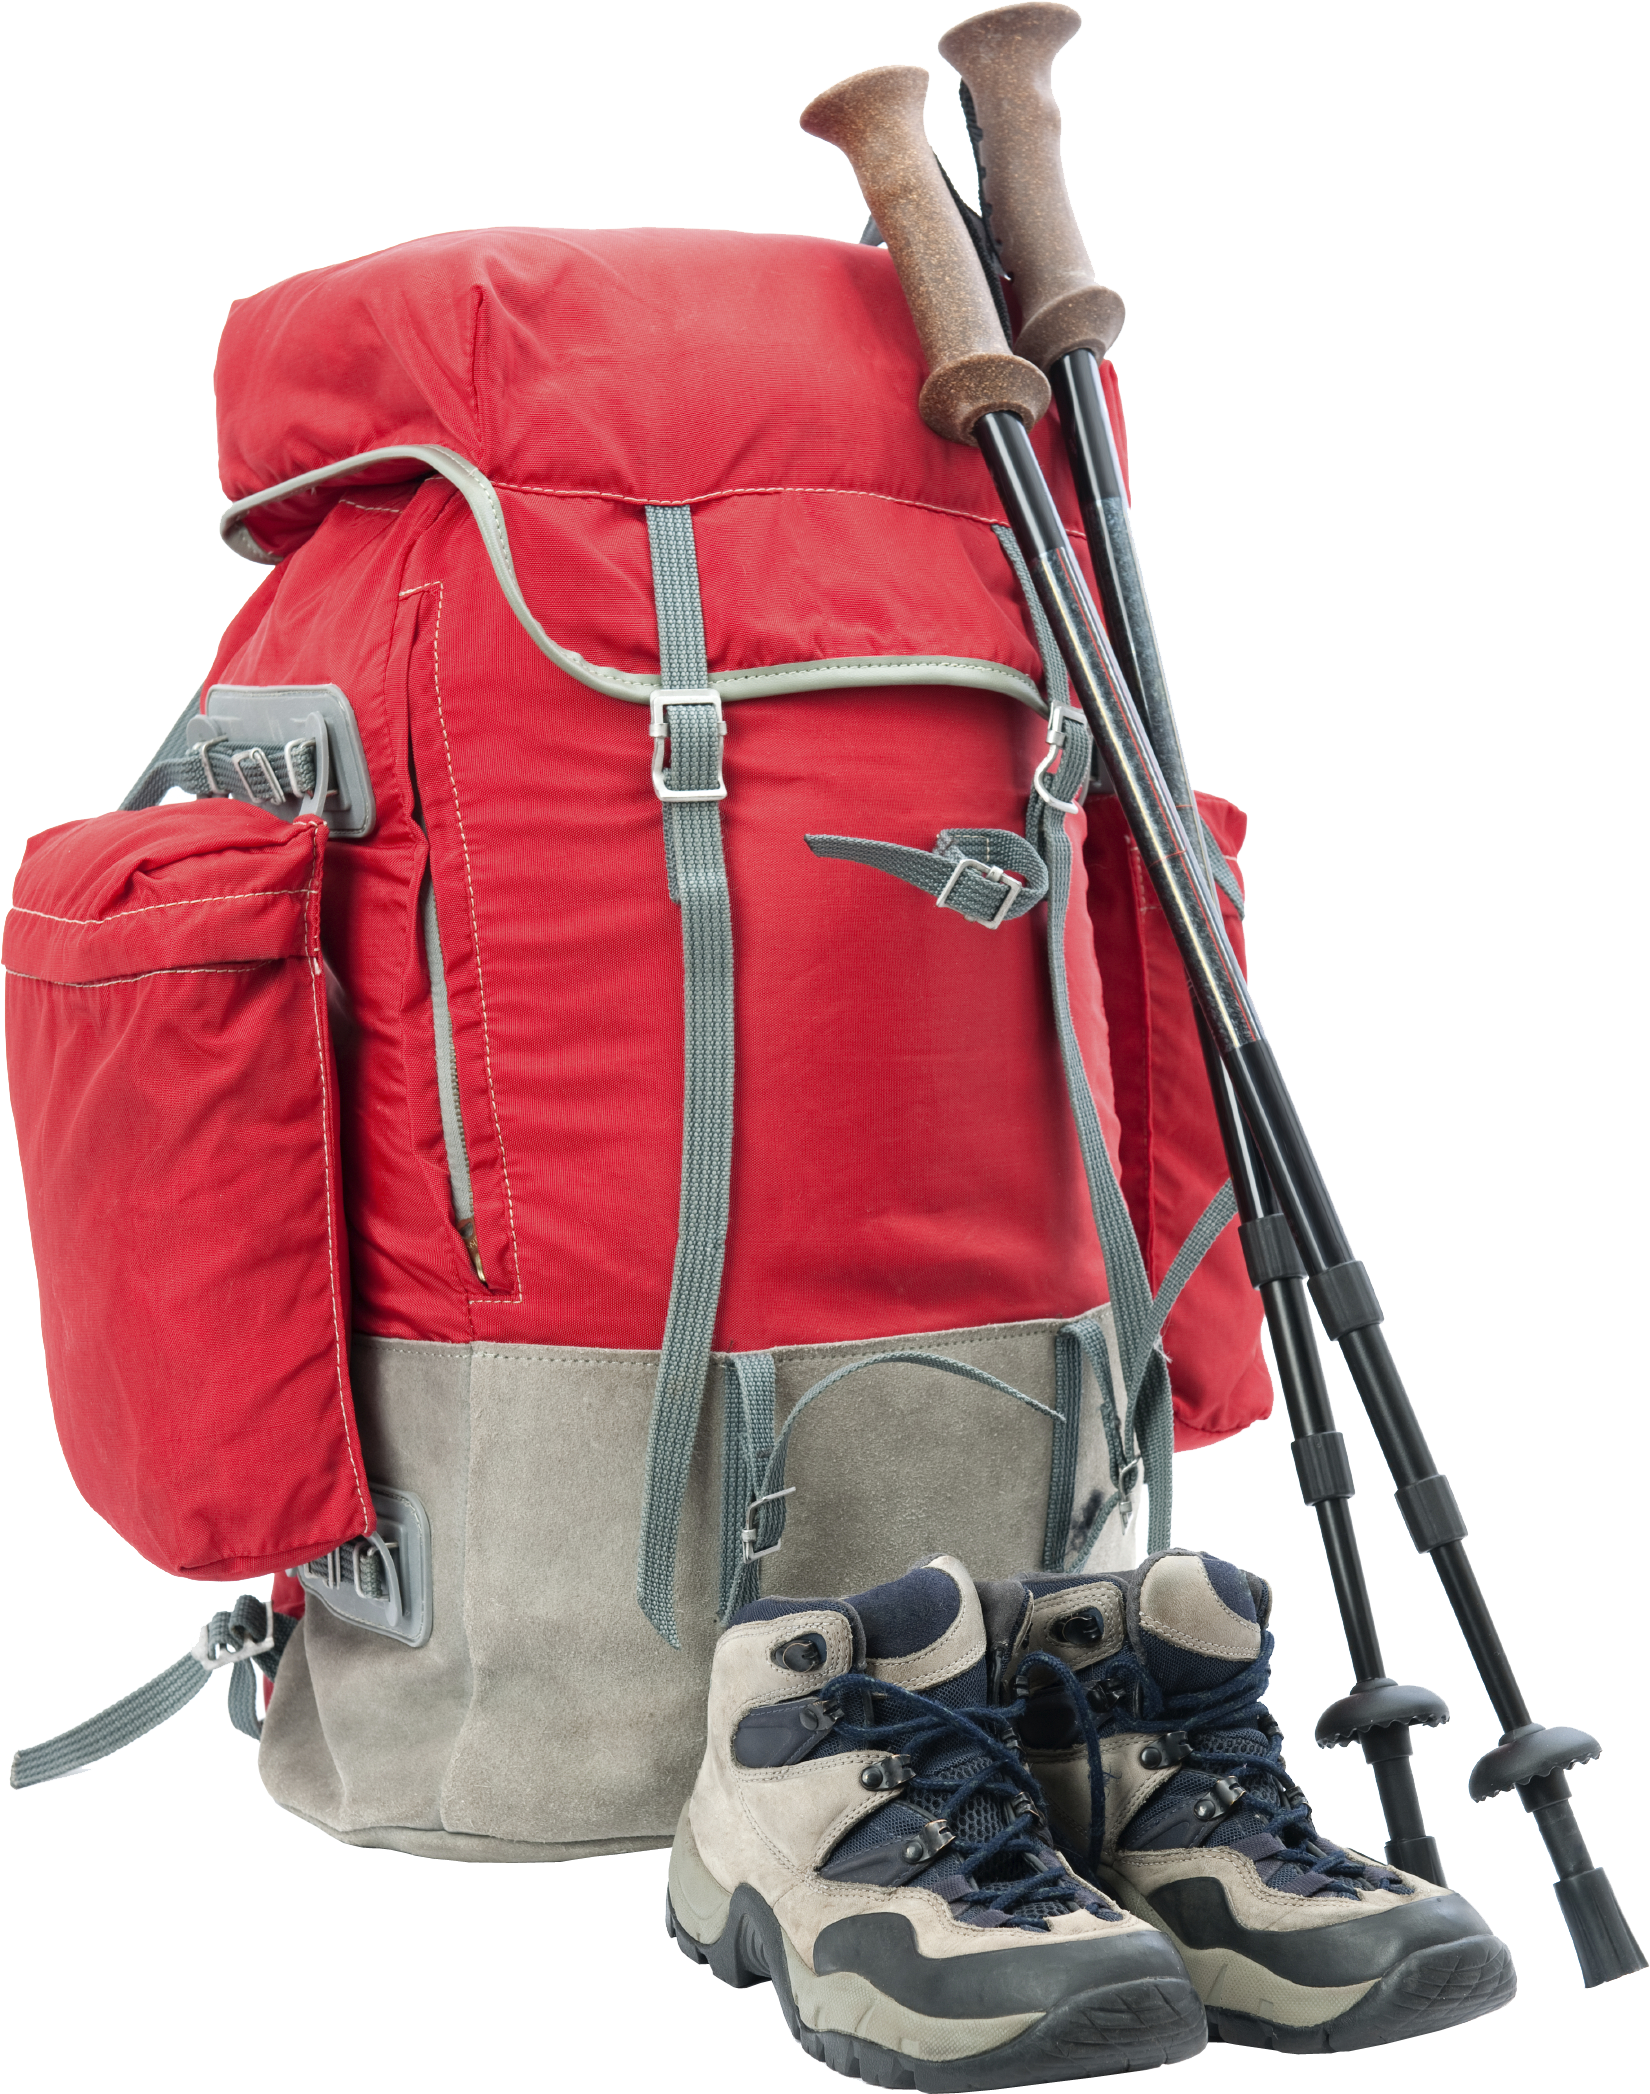 Backpack Red Sports Download Free Image PNG Image